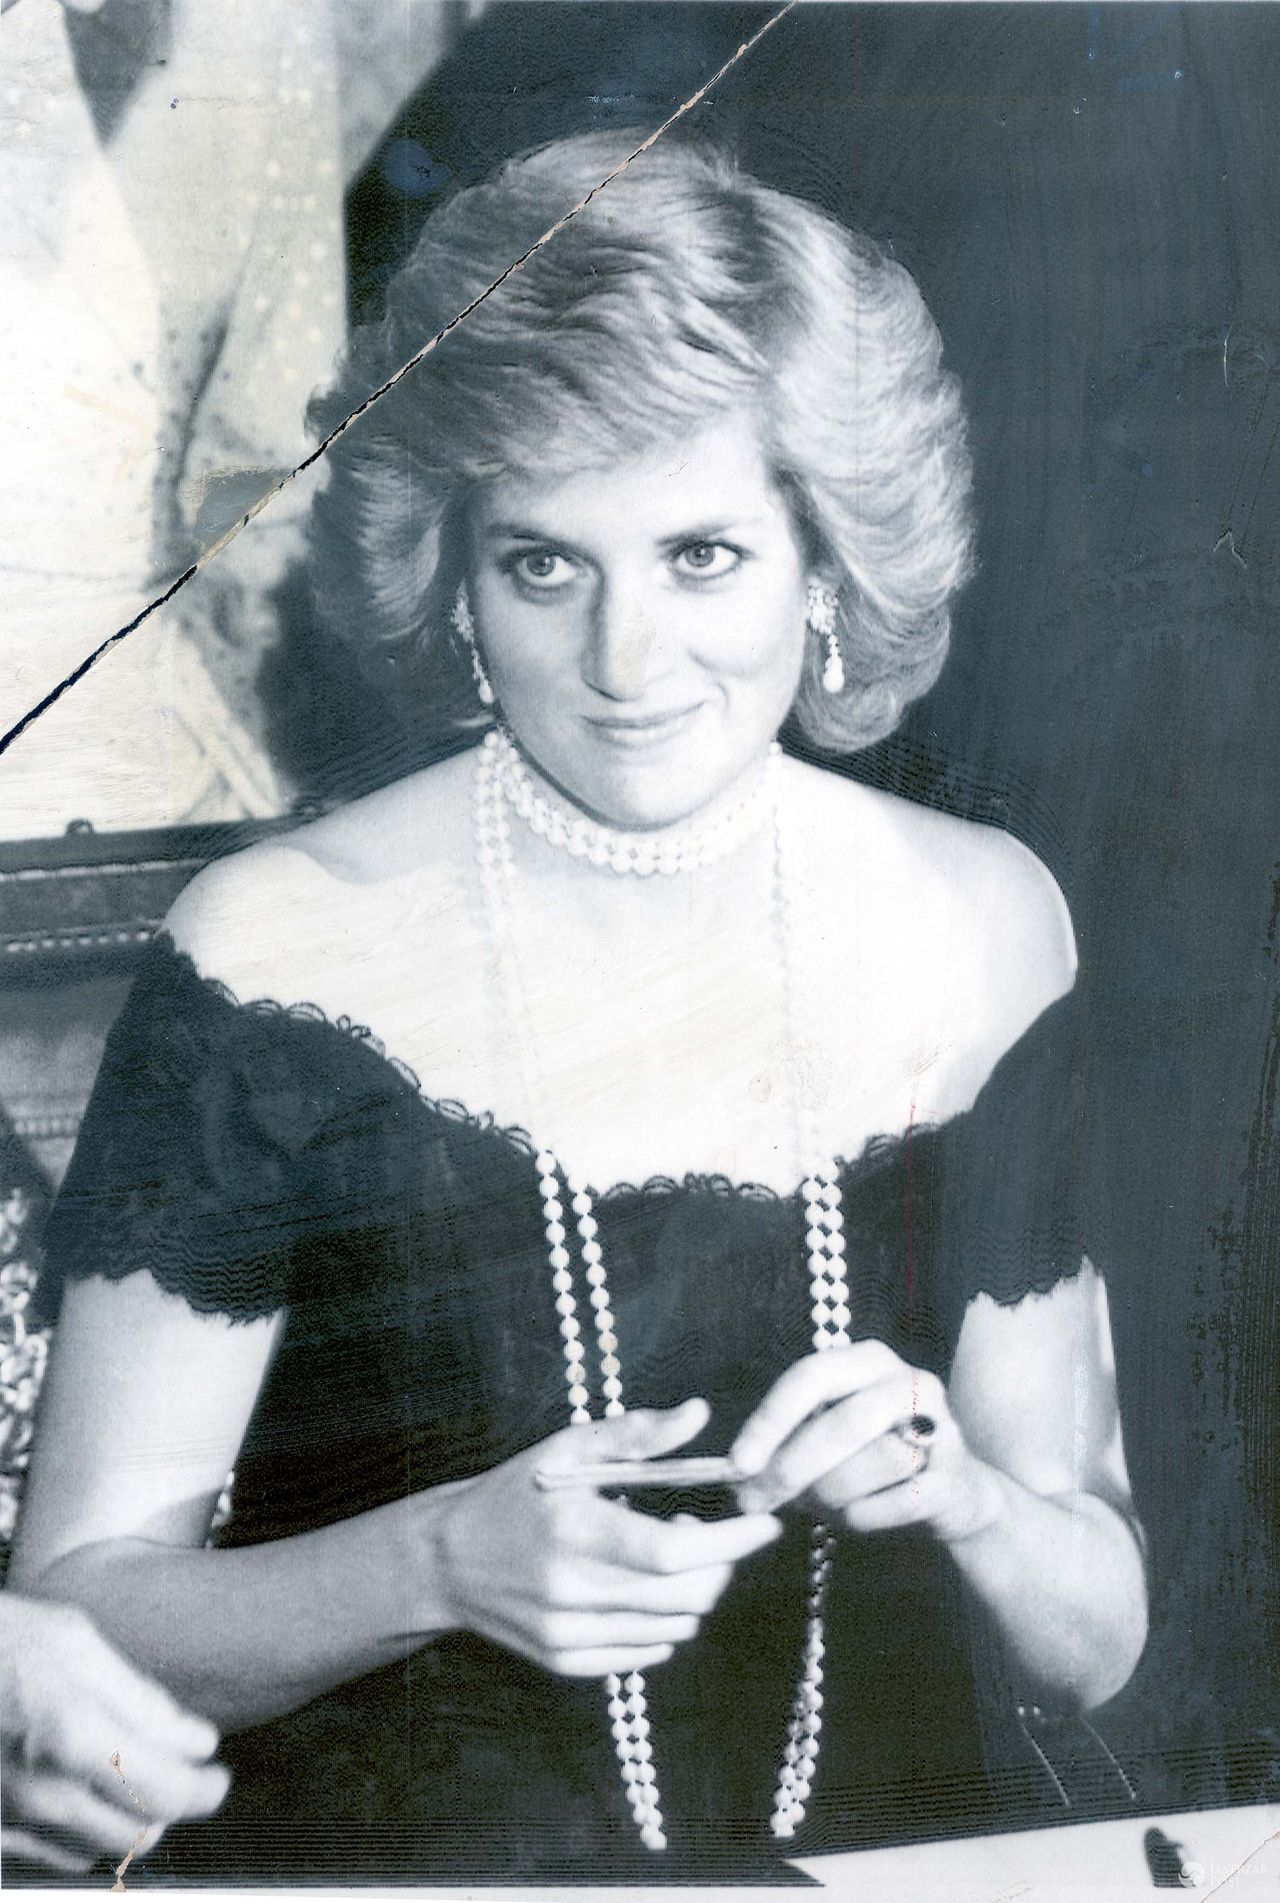 Nov 06, 1987 - Hamburg, London, Germany - With its oval blue sapphire surrounded by a cluster of 14 diamonds, the ring Prince William has given Kate Middleton is among the most famous in the world. Lady Diana Spencer chose it for her engagement to Prince Charles in 1981 from a selection presented to her by the then Crown jewellers Garrard of Mayfair. It cost £28,500 but, unusually for a choice by a member of the Royal Family, it was not unique and any member of the public could buy the same ring from the Garrard catalogue.PICTURED:-  PRINCESS DIANA has a double-row string of pearls around her neck as she is dressed in a strapless gown during a reception at the Hamburg City Hall, Friday night, upon the visit of the royal couple to this town.

(Credit Image: © Mike Forster/Daily Mail/SOLO Syndication)